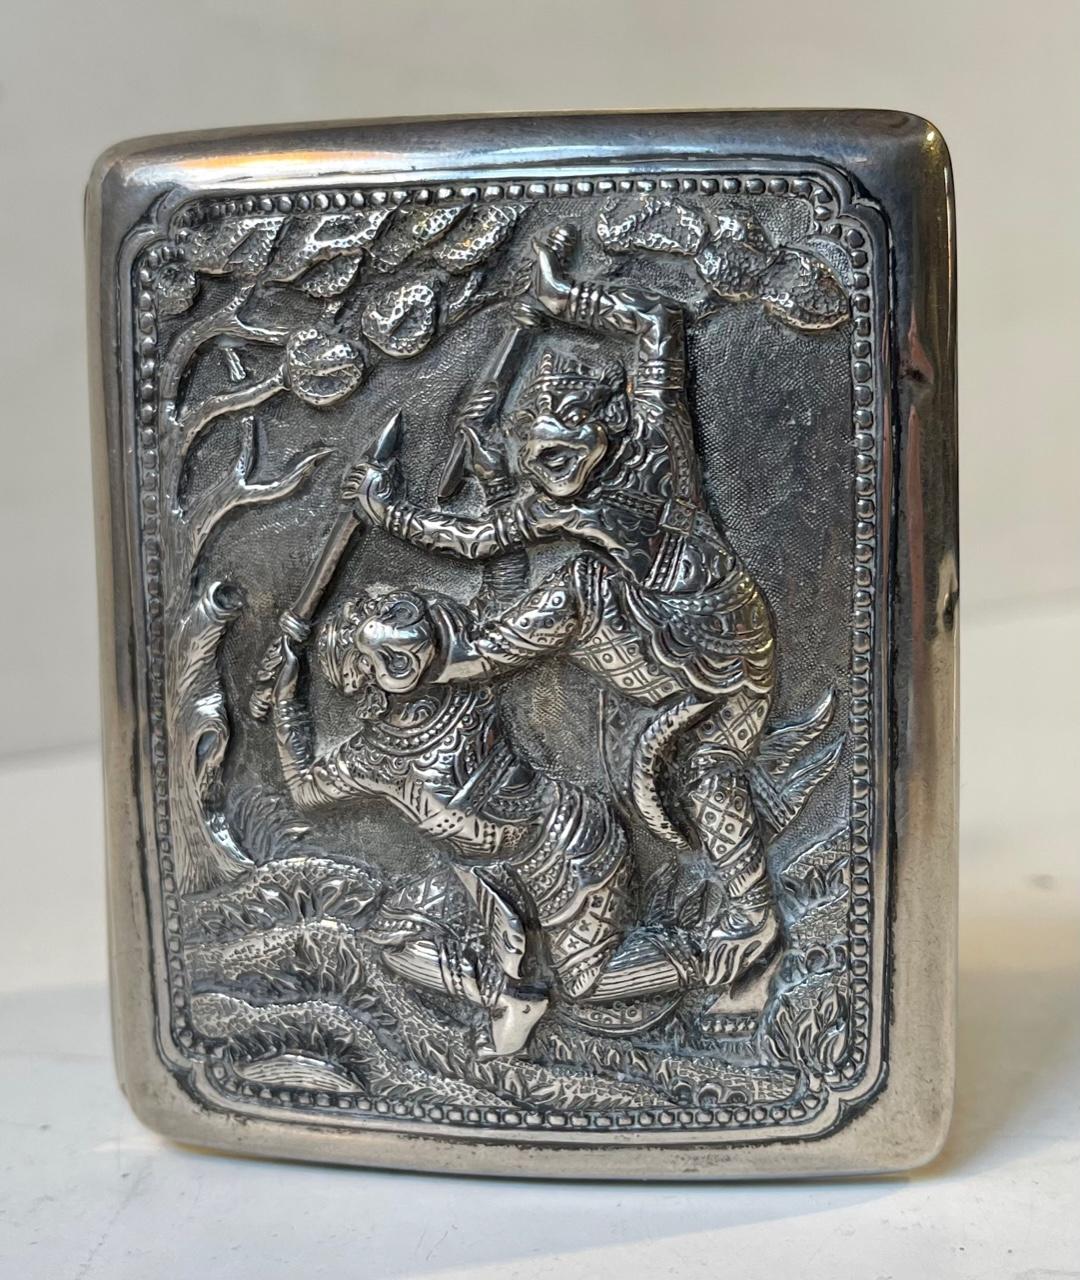 A fine entirely handcrafted antique cigarette case with a gilded interior. Its front depicts a battle scene where the warriors, presumably Chinese Gods, wears mythological masks. We believe one of them is of Kailu or Kaishan. The details to the